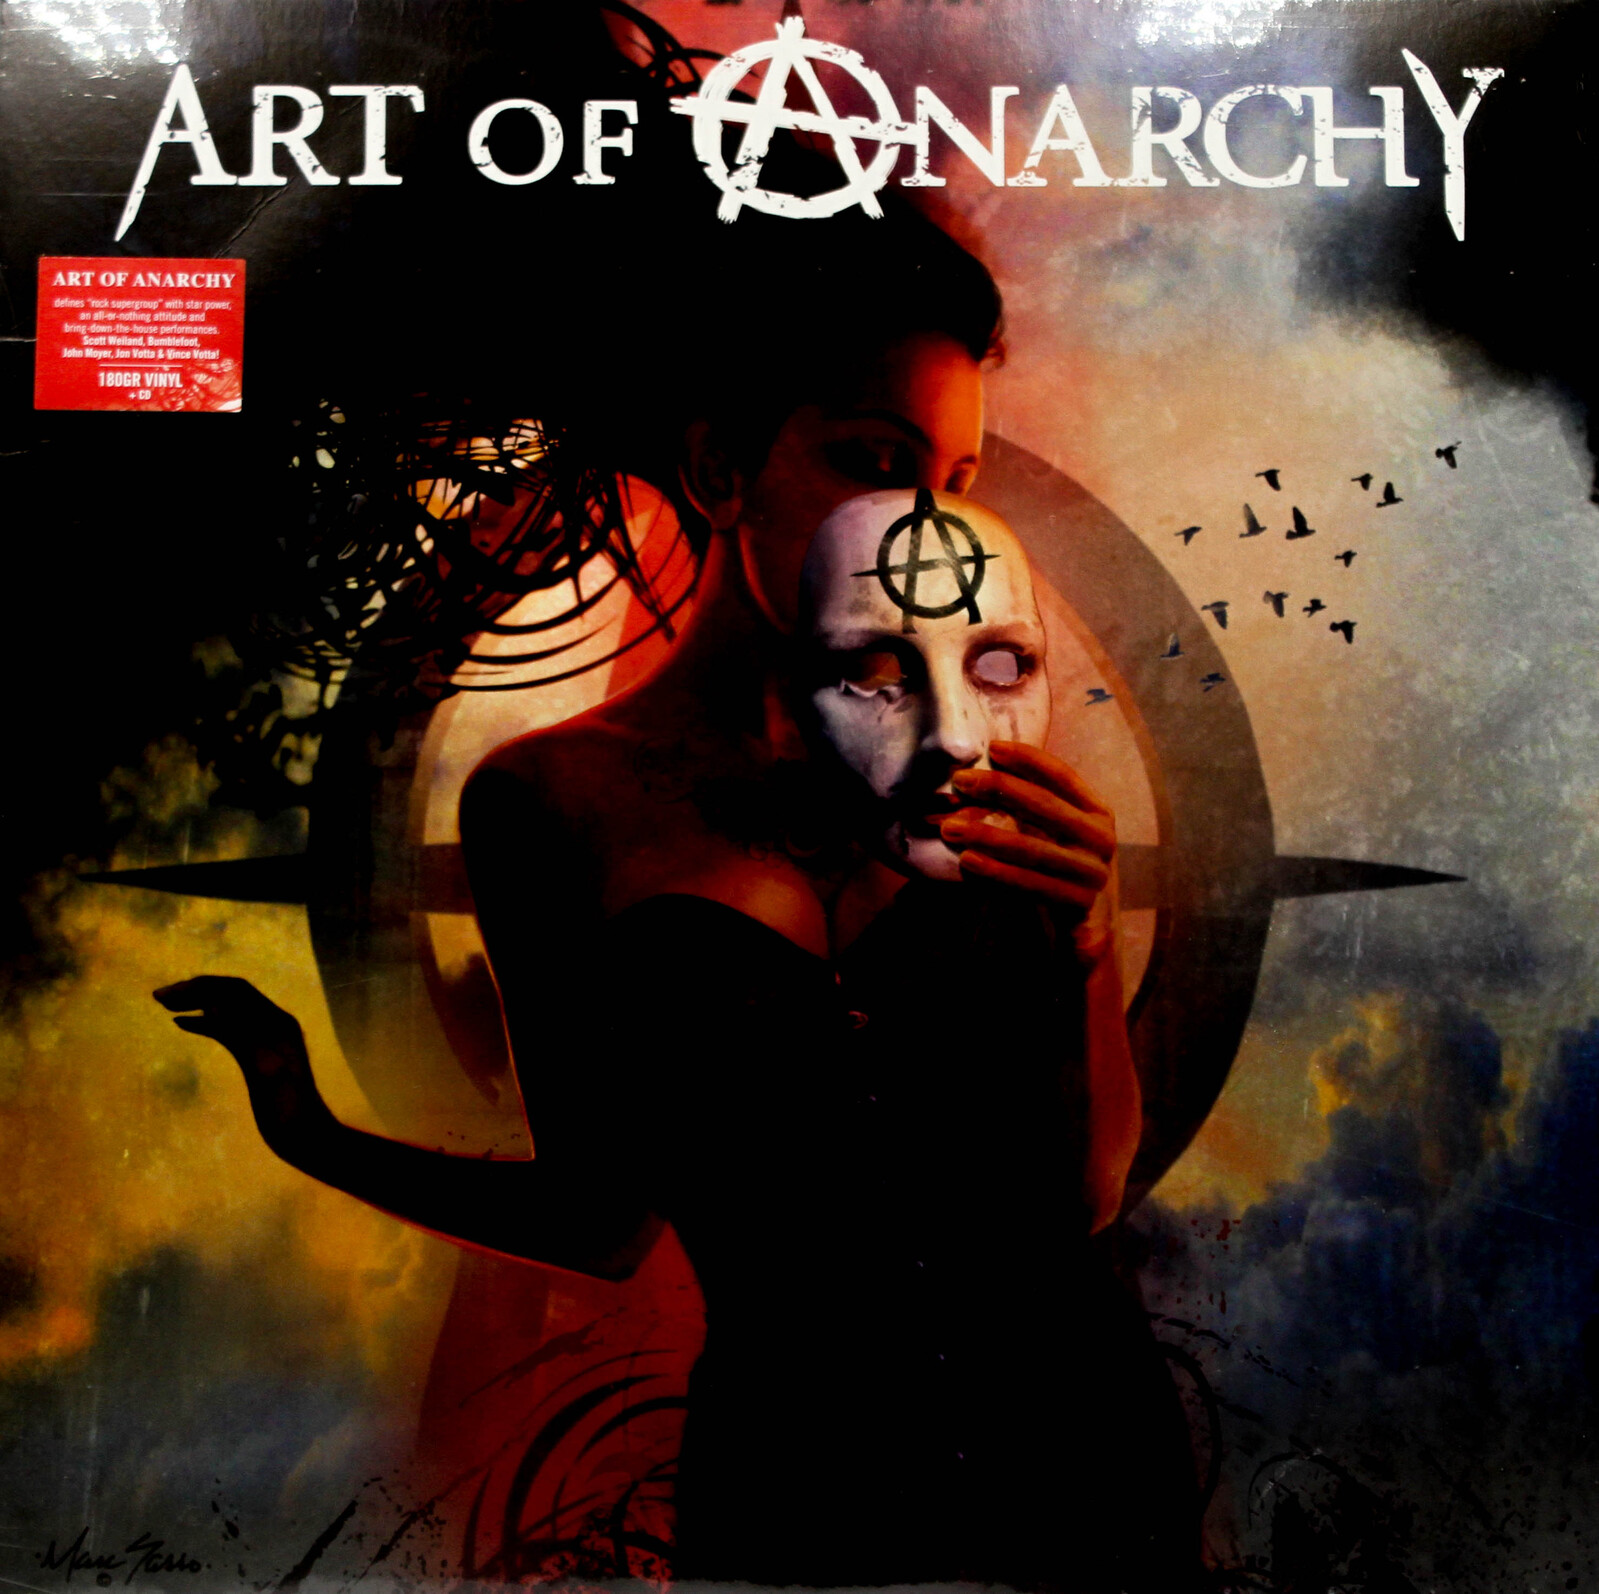 Art Of Anarchy ‎– Art Of Anarchy Vinyl Record New Music Album - Another ...